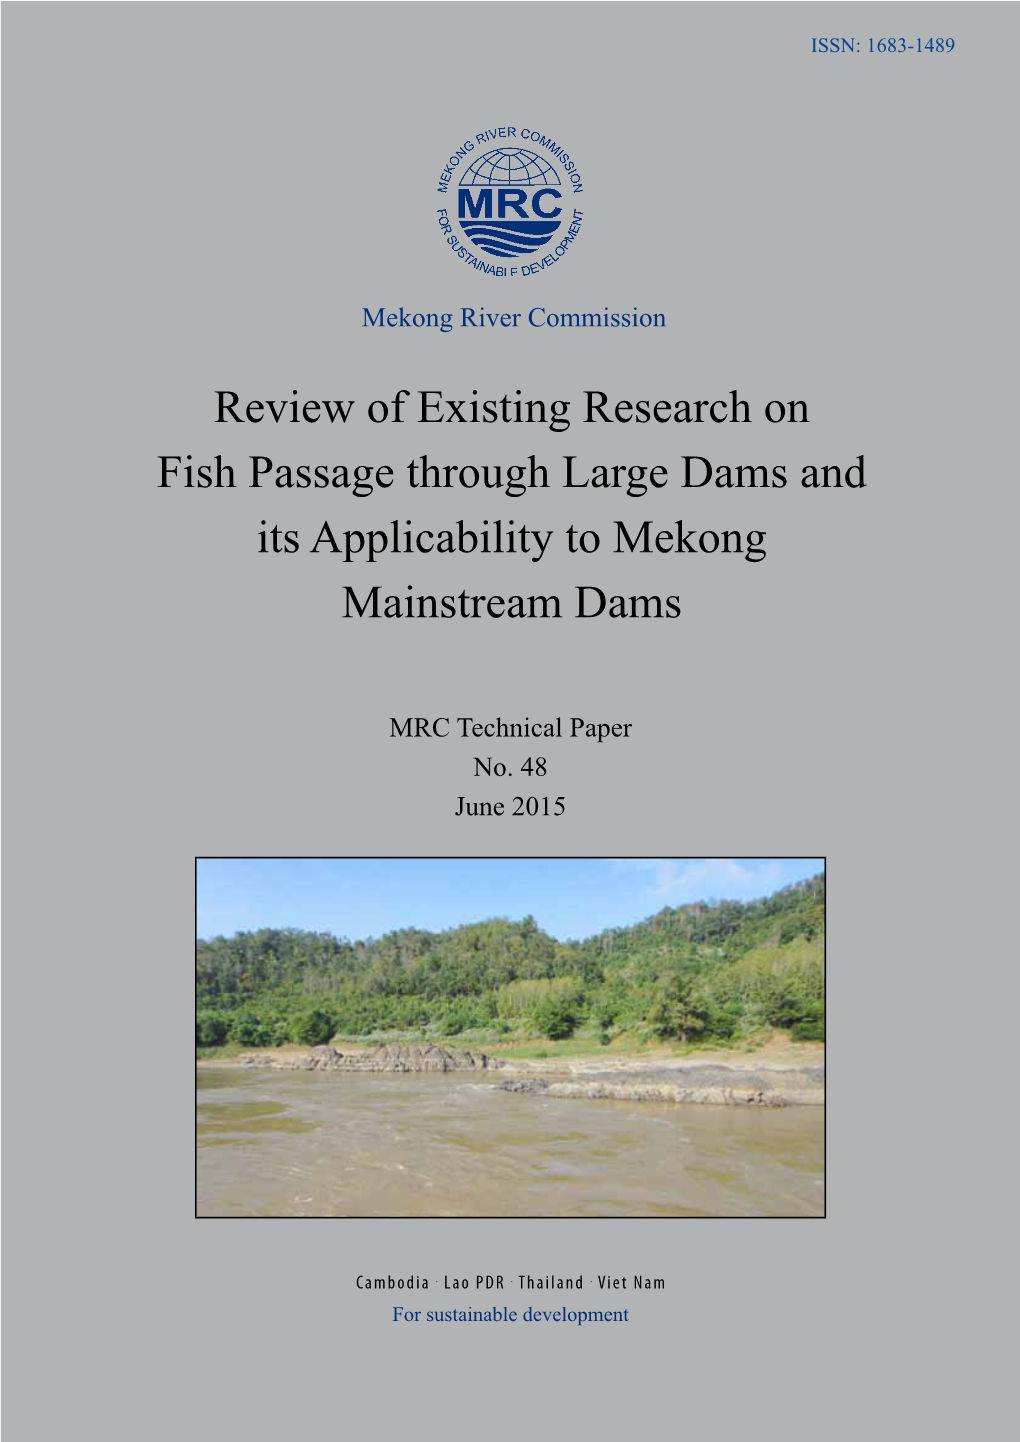 Review of Existing Research on Fish Passage Through Large Dams and Its Applicability